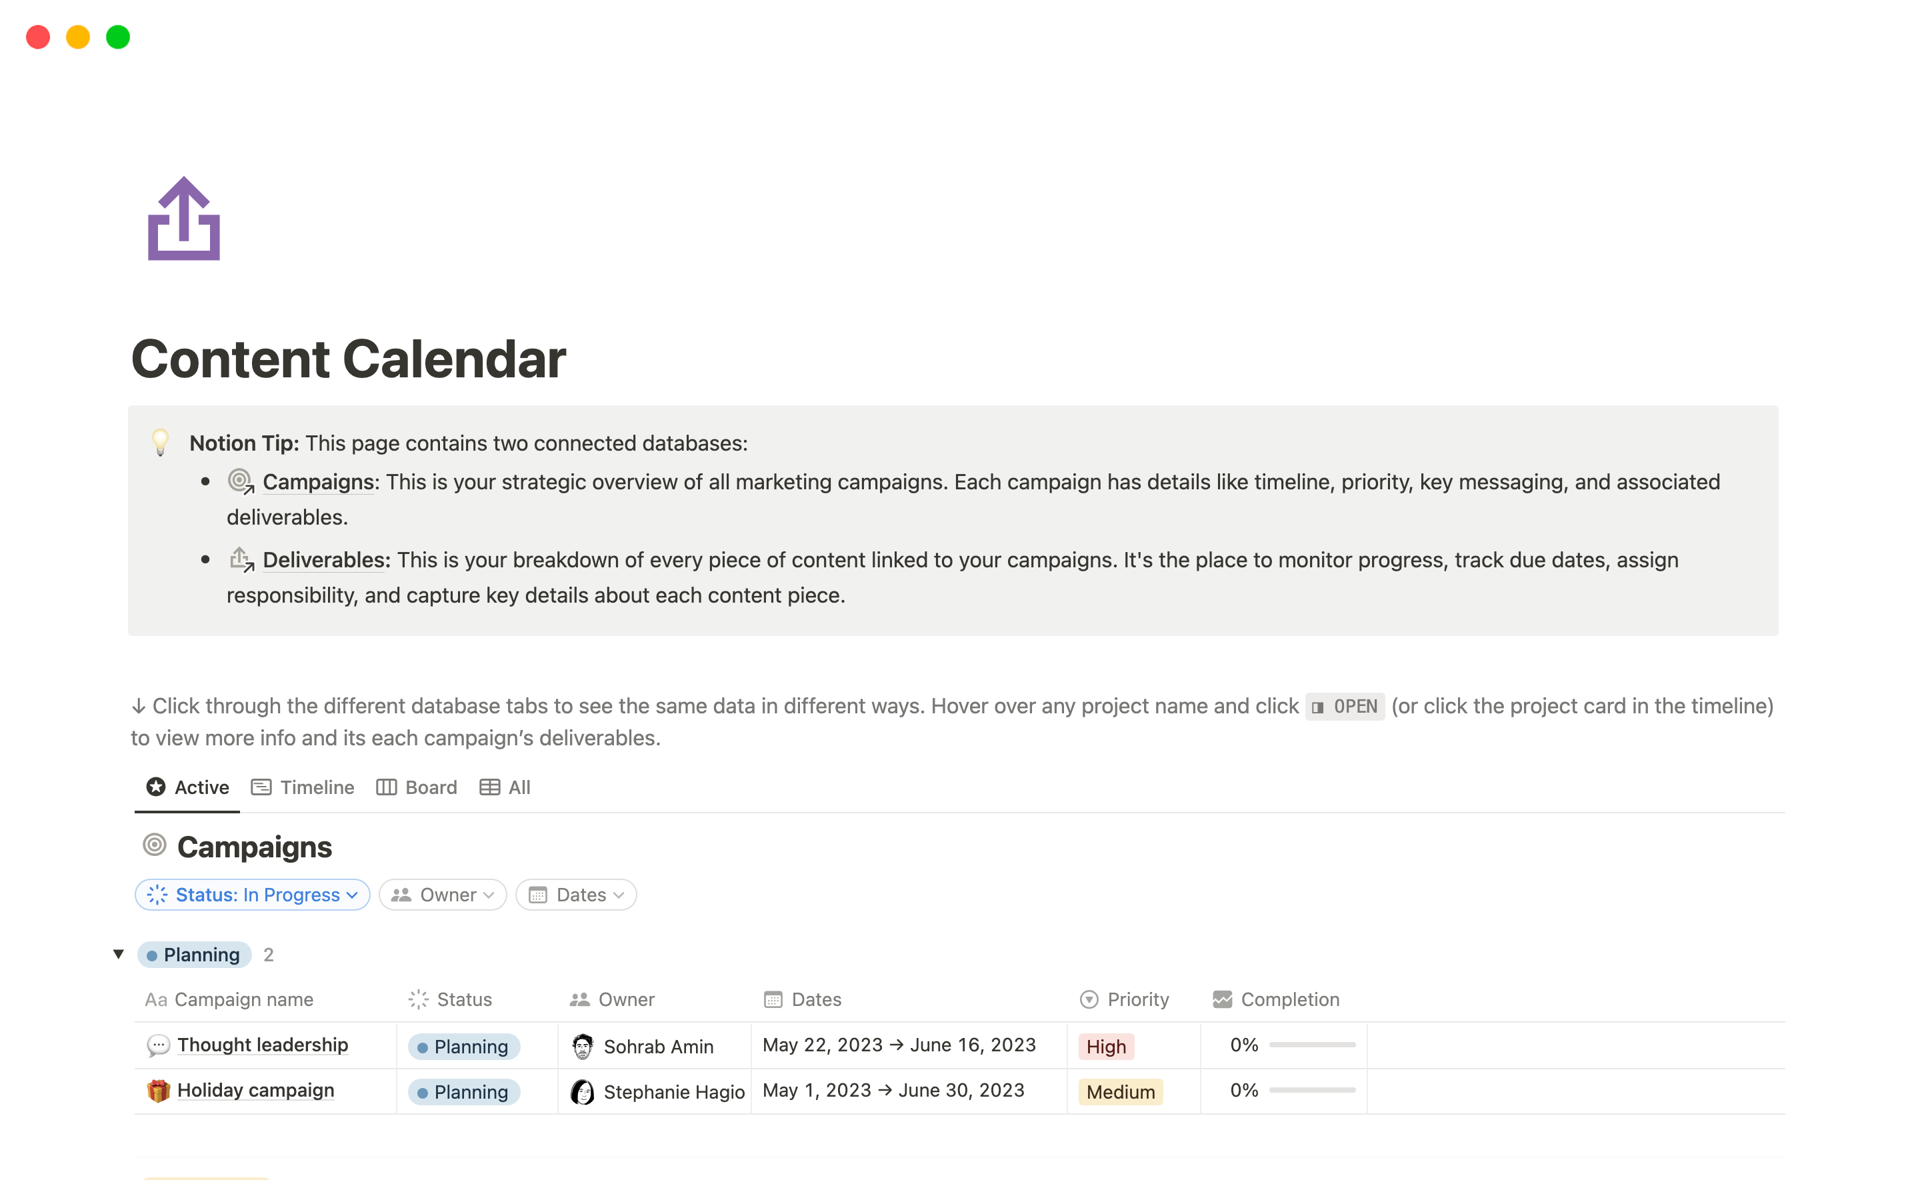 Unify your marketing vision with Notion. Centralize calendars, launches, and assets with Notion's integrated workspace.